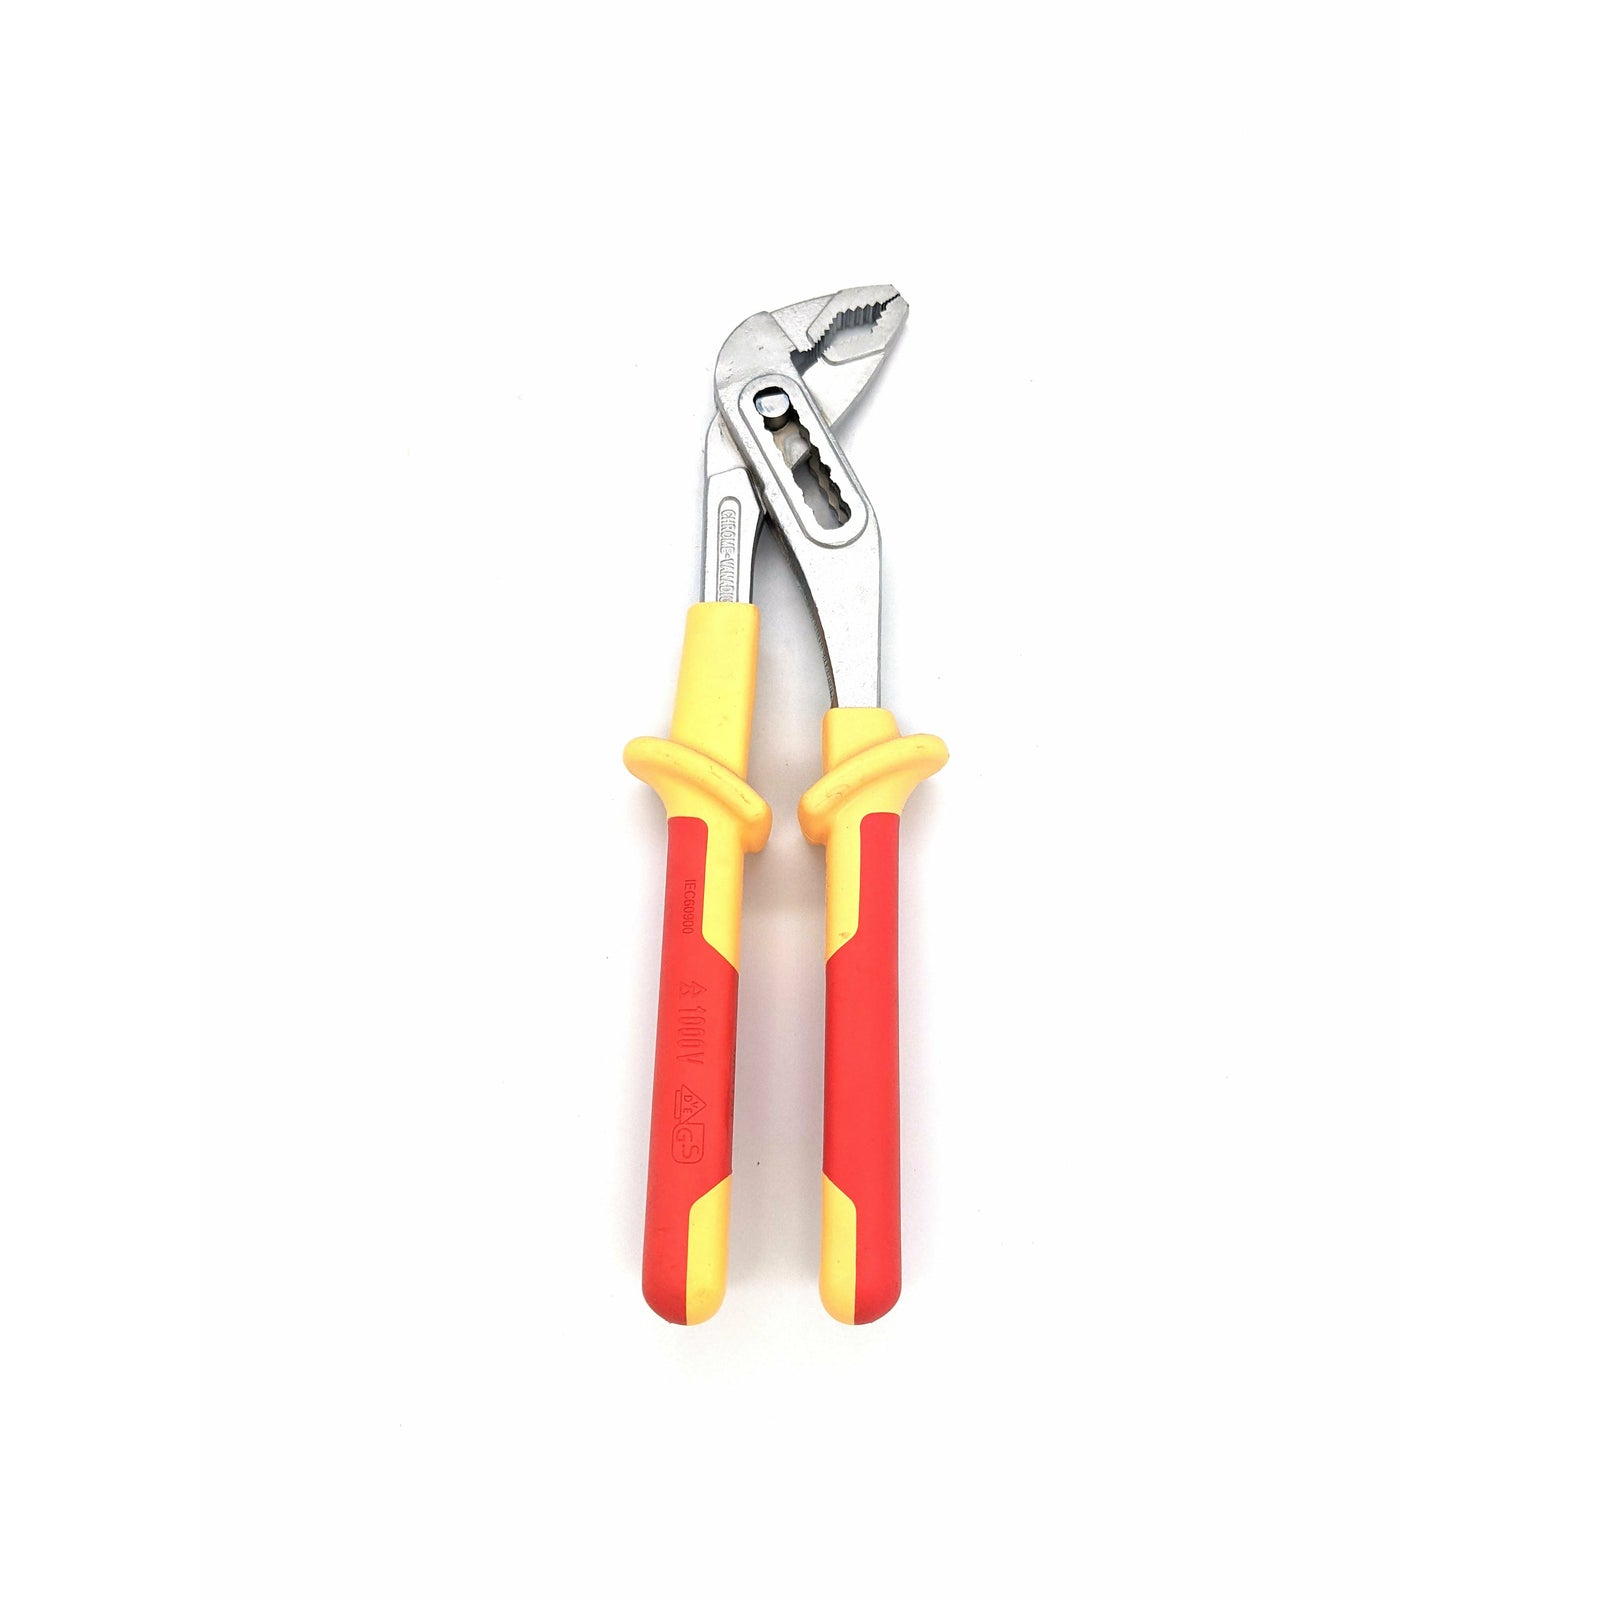 Workpro Vde Insulated Groove Joint Pliers